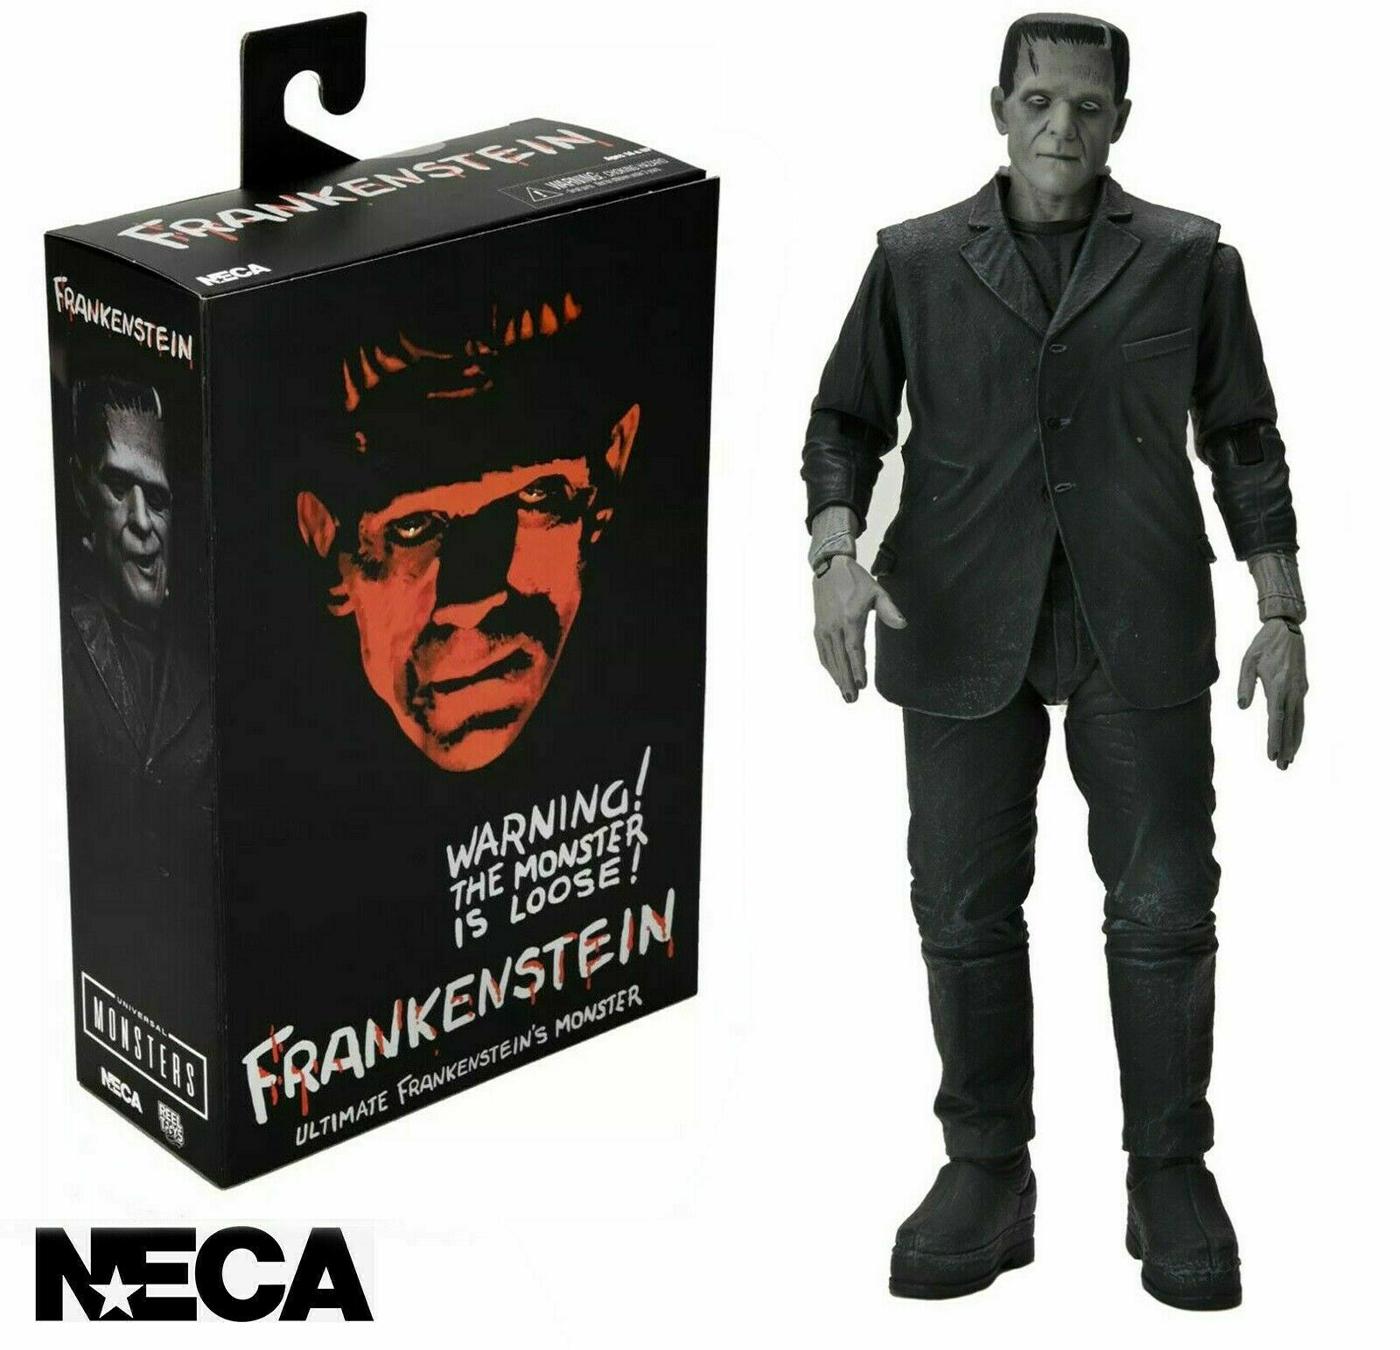 Universal Monsters Ultimate Frankenstein. Black and white version.